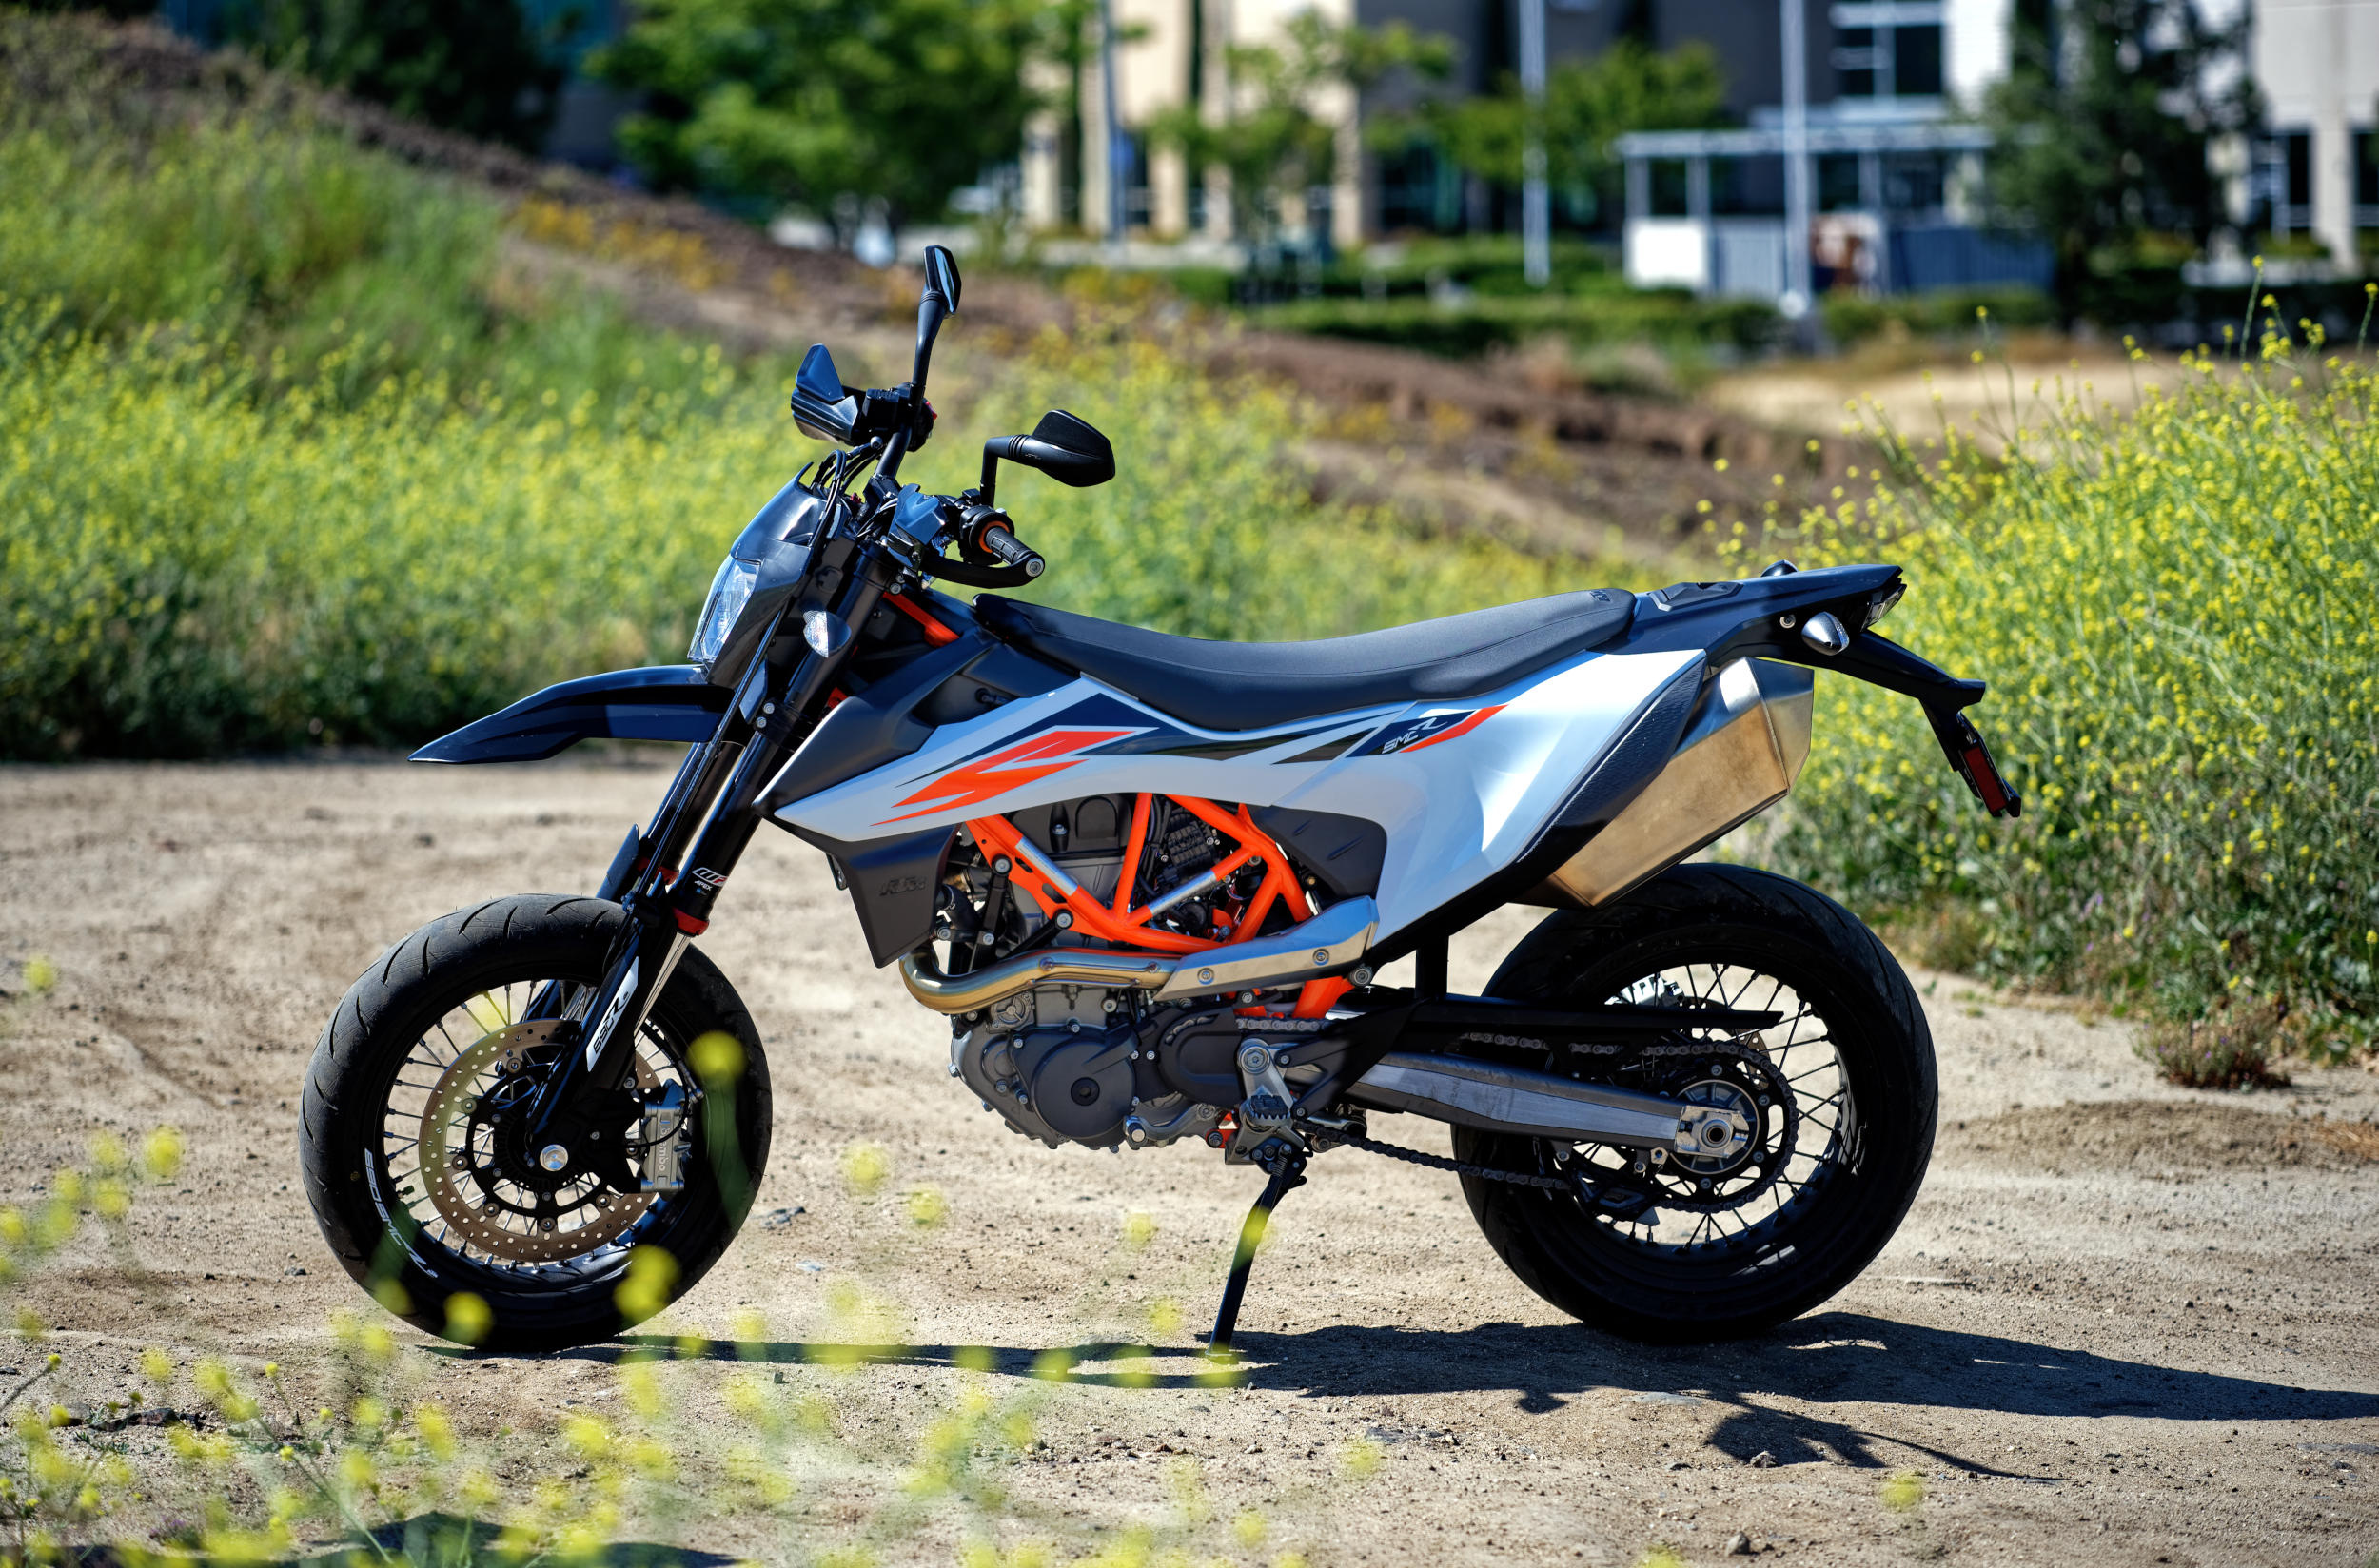 KTM 690 SMC, 2019 model, Ride review and product insights, 2500x1650 HD Desktop